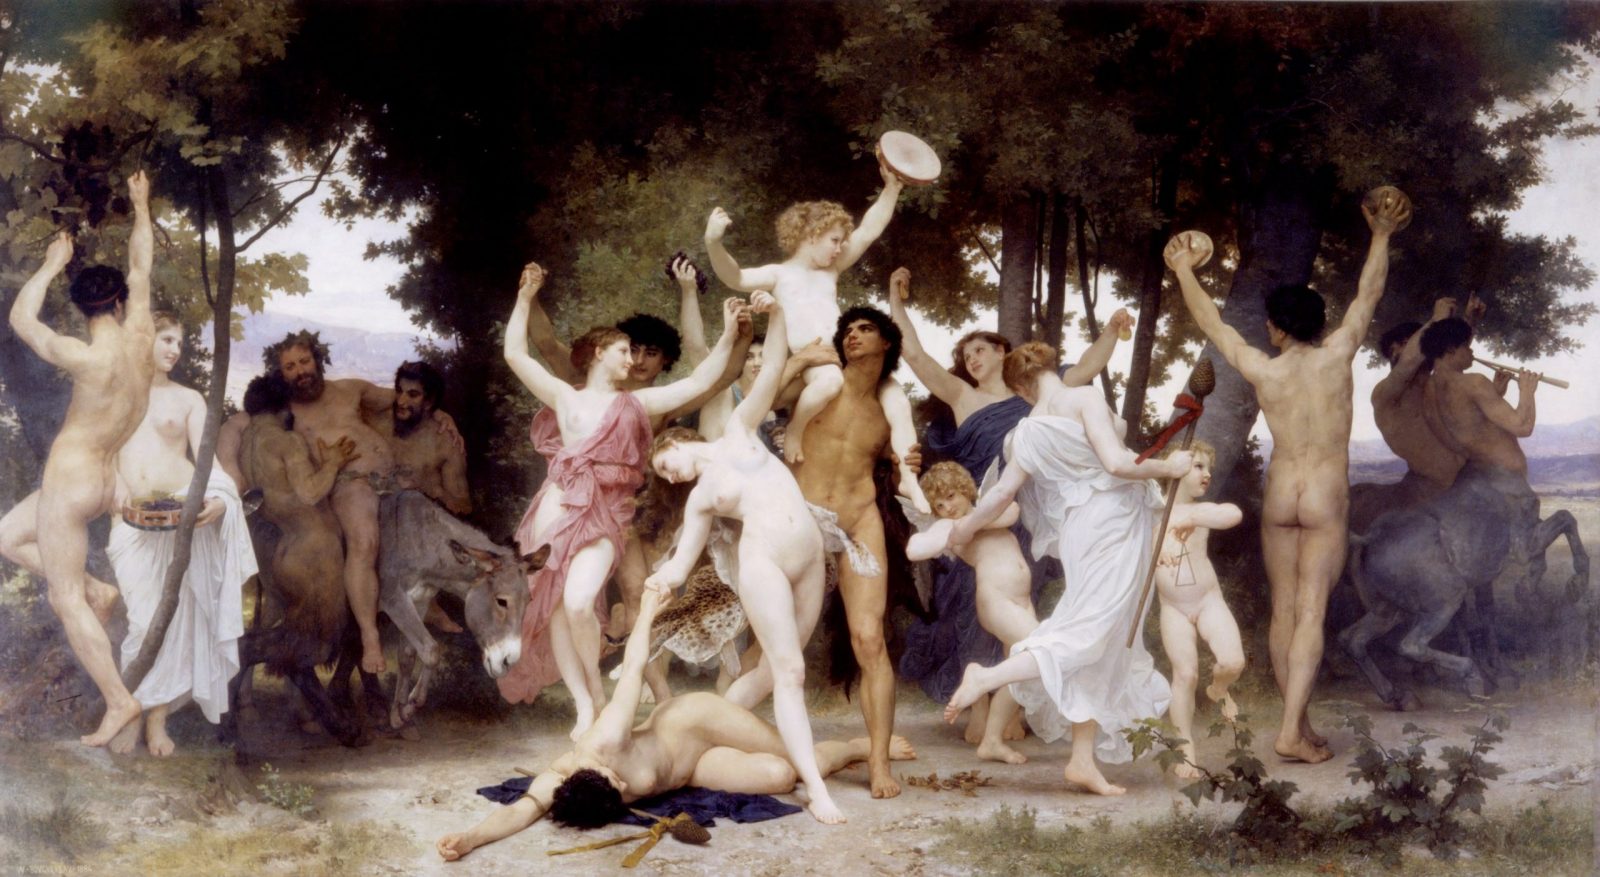 William-Adolphe_Bouguereau_(1825-1905)_-_The_Youth_of_Bacchus_(1884)